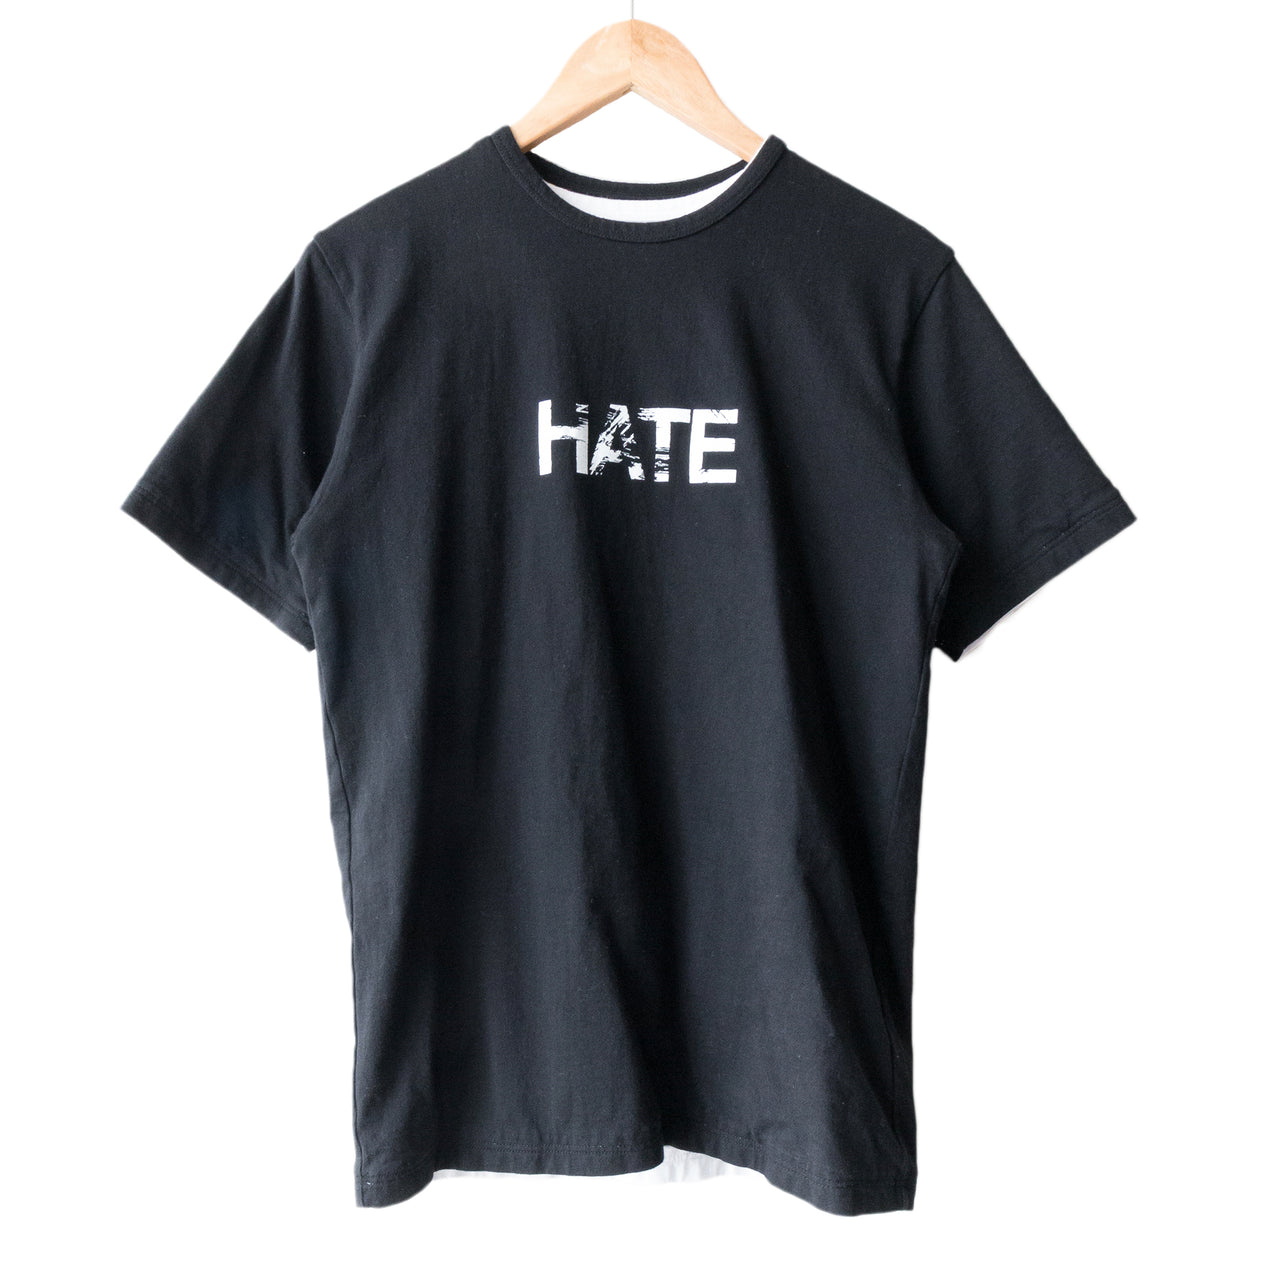 Undercover Love Hate Tee - AW99 "Ambivalence"